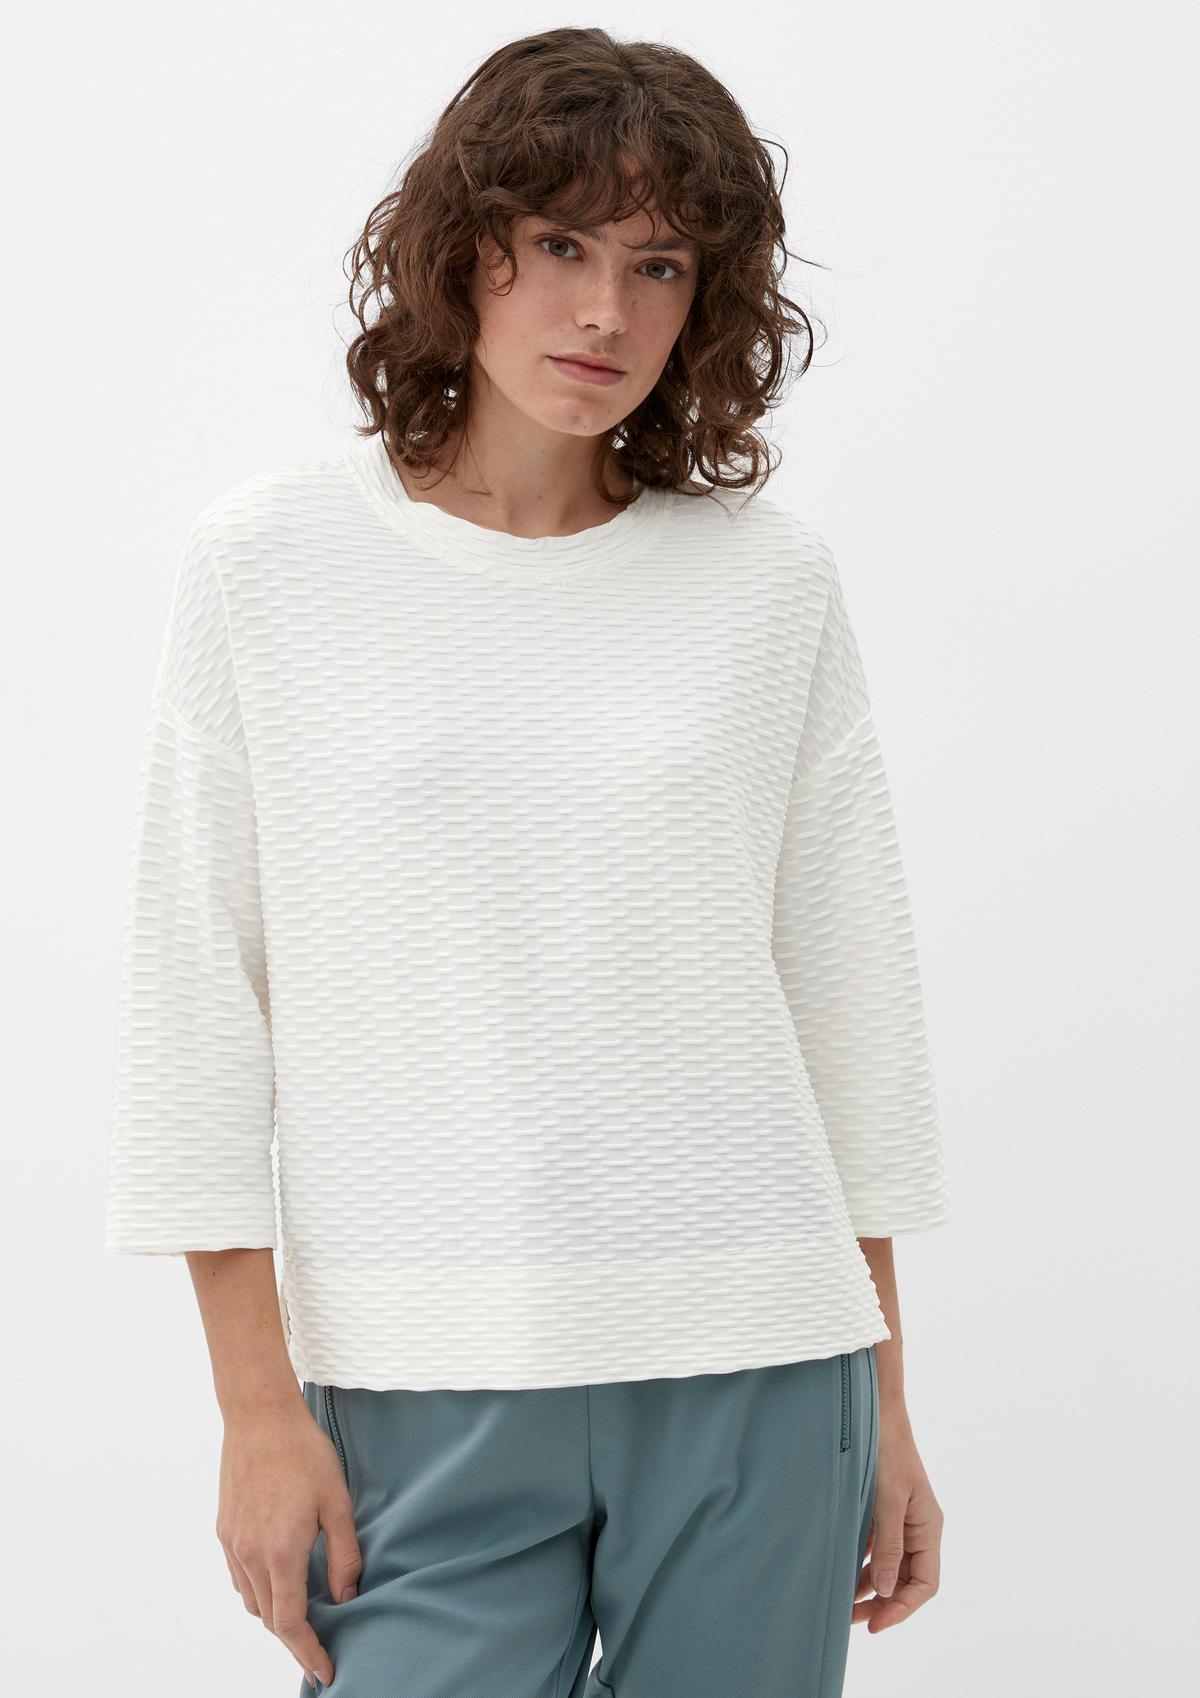 ecru pattern with - textured a Top